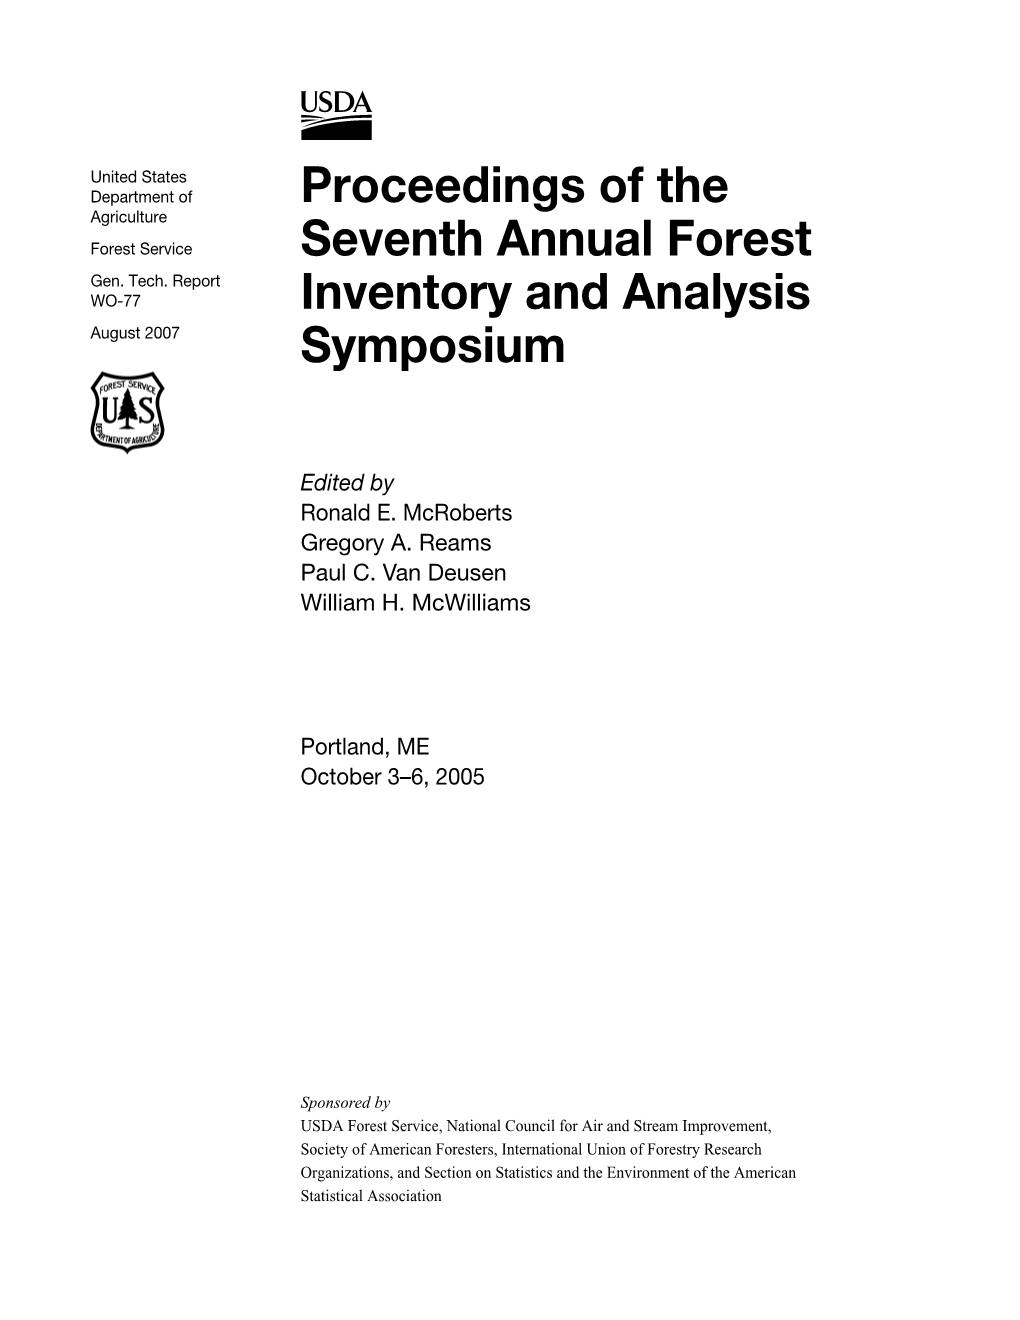 Proceedings of the Seventh Annual Forest Inventory and Analysis Symposium; 2005 October 3–6; Portland, ME